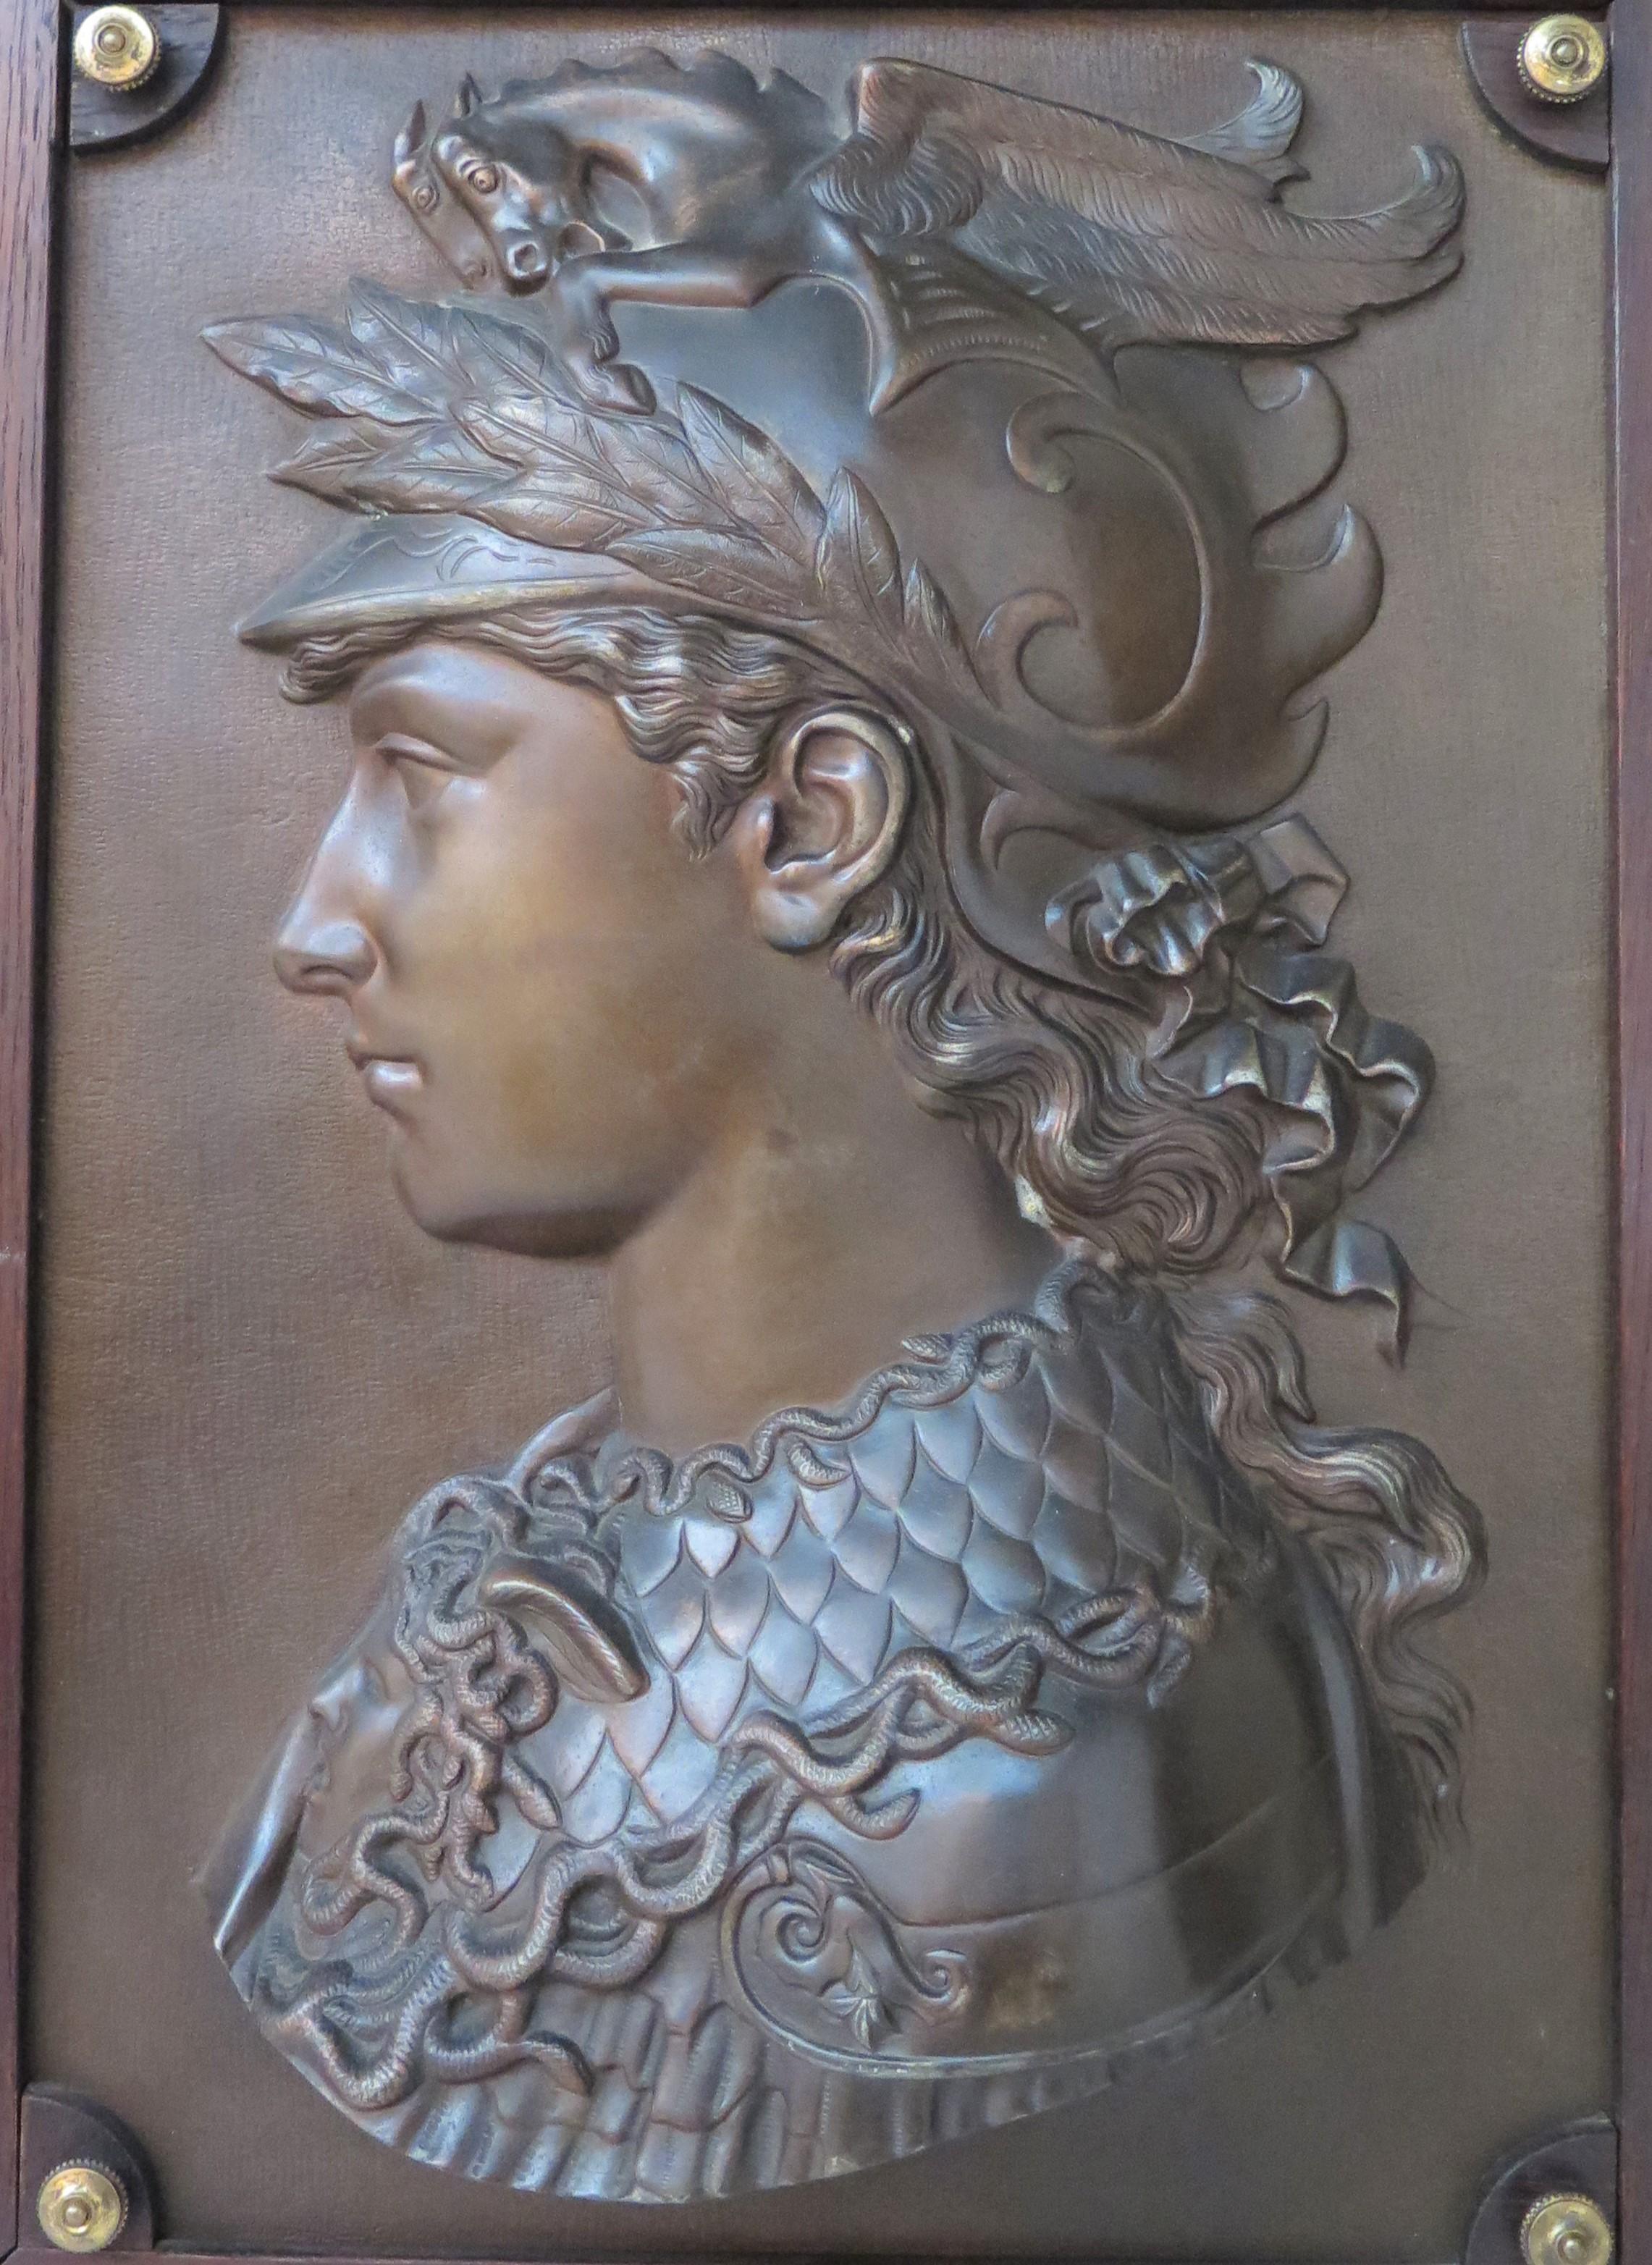 a pair of Grand Tour souvenir bronze bas relief portrait plaques mounted in wooden frames with ring hangers (left) bust of Perseus, (right) bust of Alexander the Great, French, late 19th / early 20th century

24.25'' H x 18.5'' W x 4.5'' D 